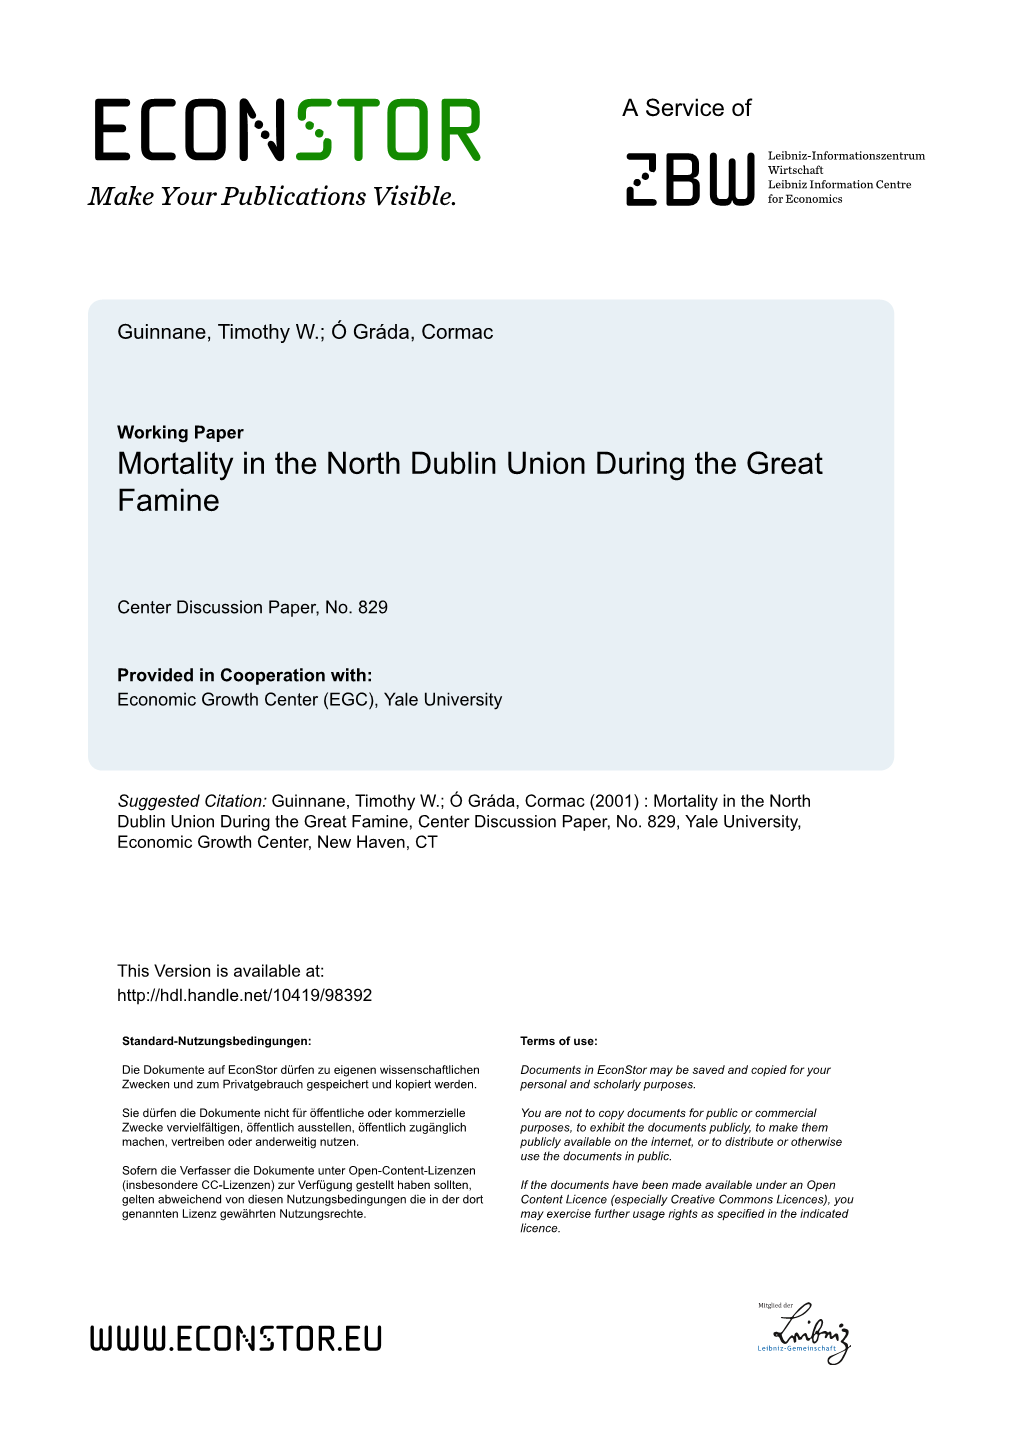 Mortality in the North Dublin Union During the Great Famine